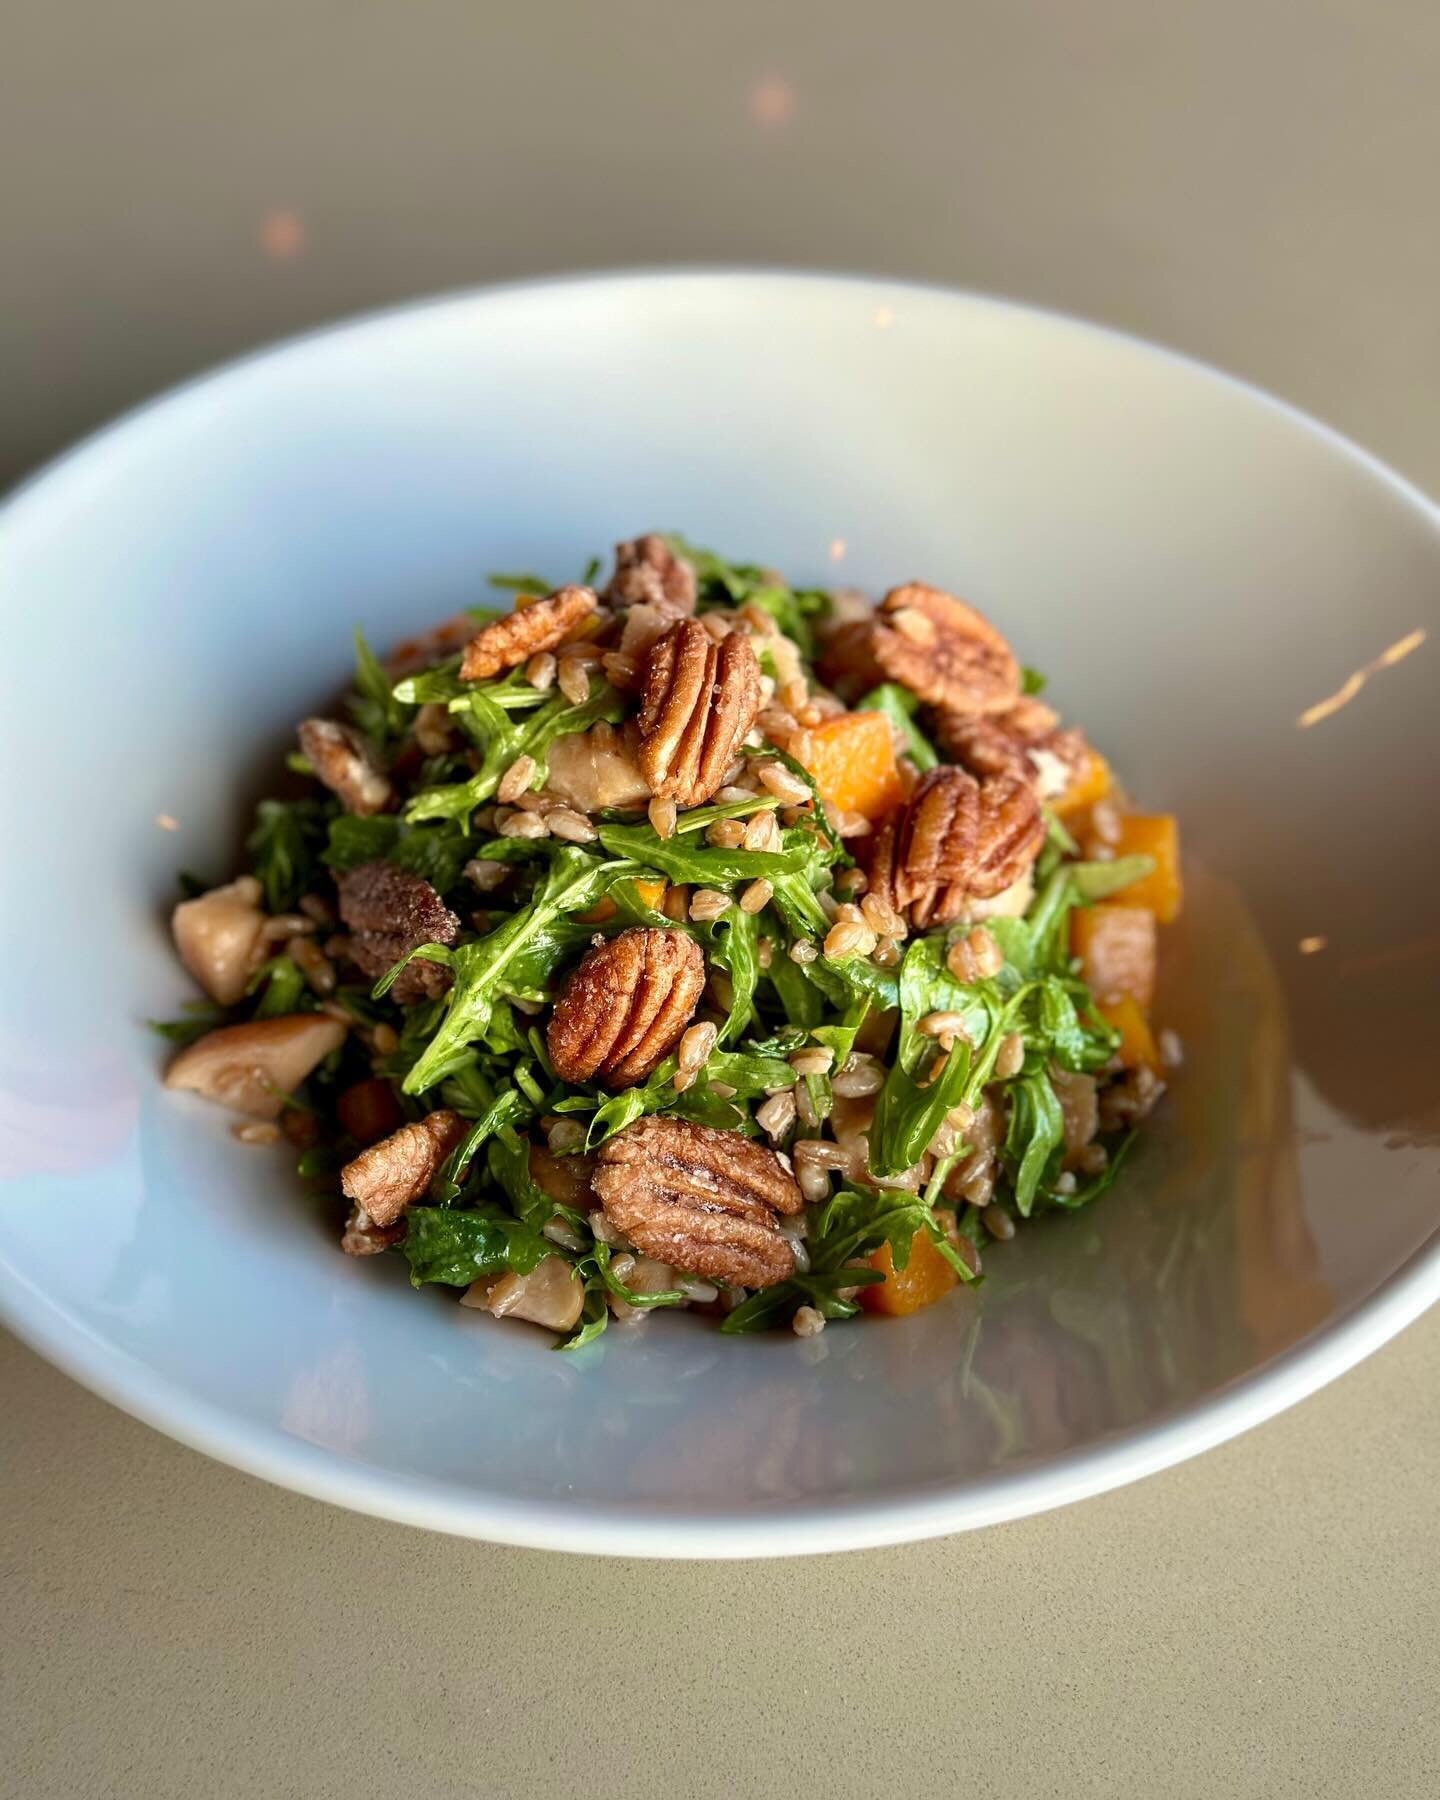 The Roasted Butternut &amp; Apple Salad. What New Years Resolutions are made of! 

#newyearsresolution #salad #candiedpecans #mapleginger #lakehighlands #dallasdining #dallassalads #whiterocklake #eastdallas